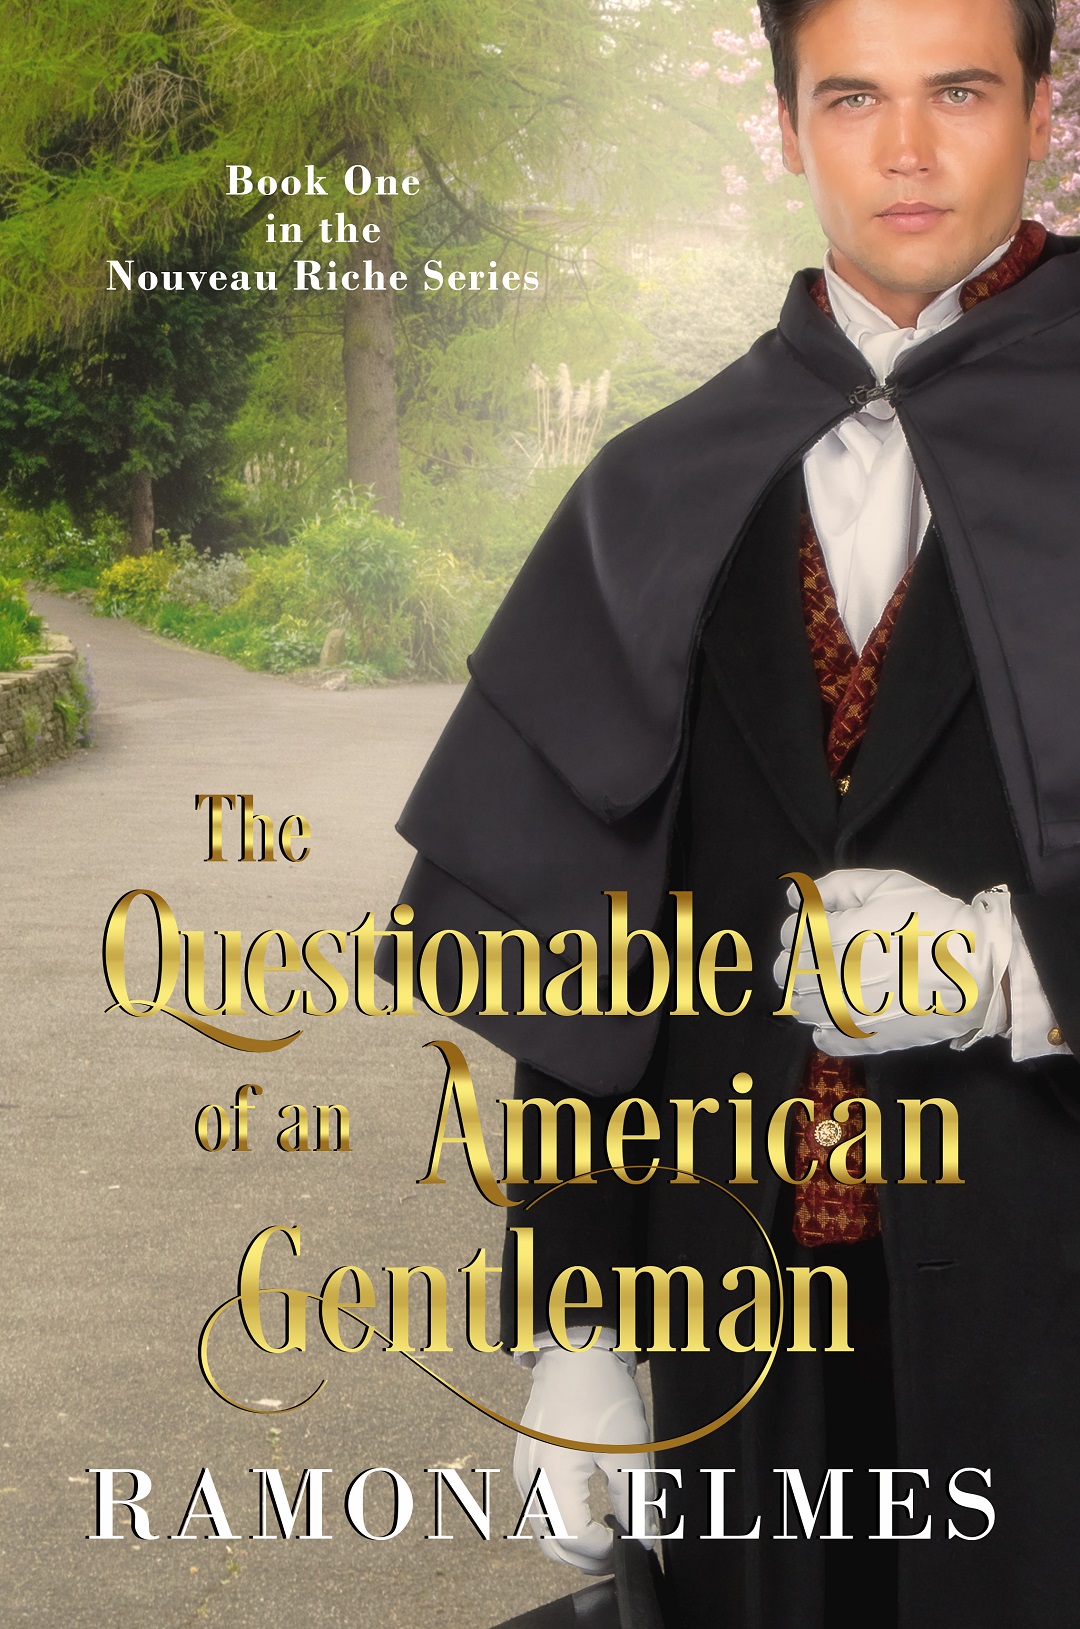 The Questionable Acts of an American Gentleman available on Amazon and with Kindle Unlimited